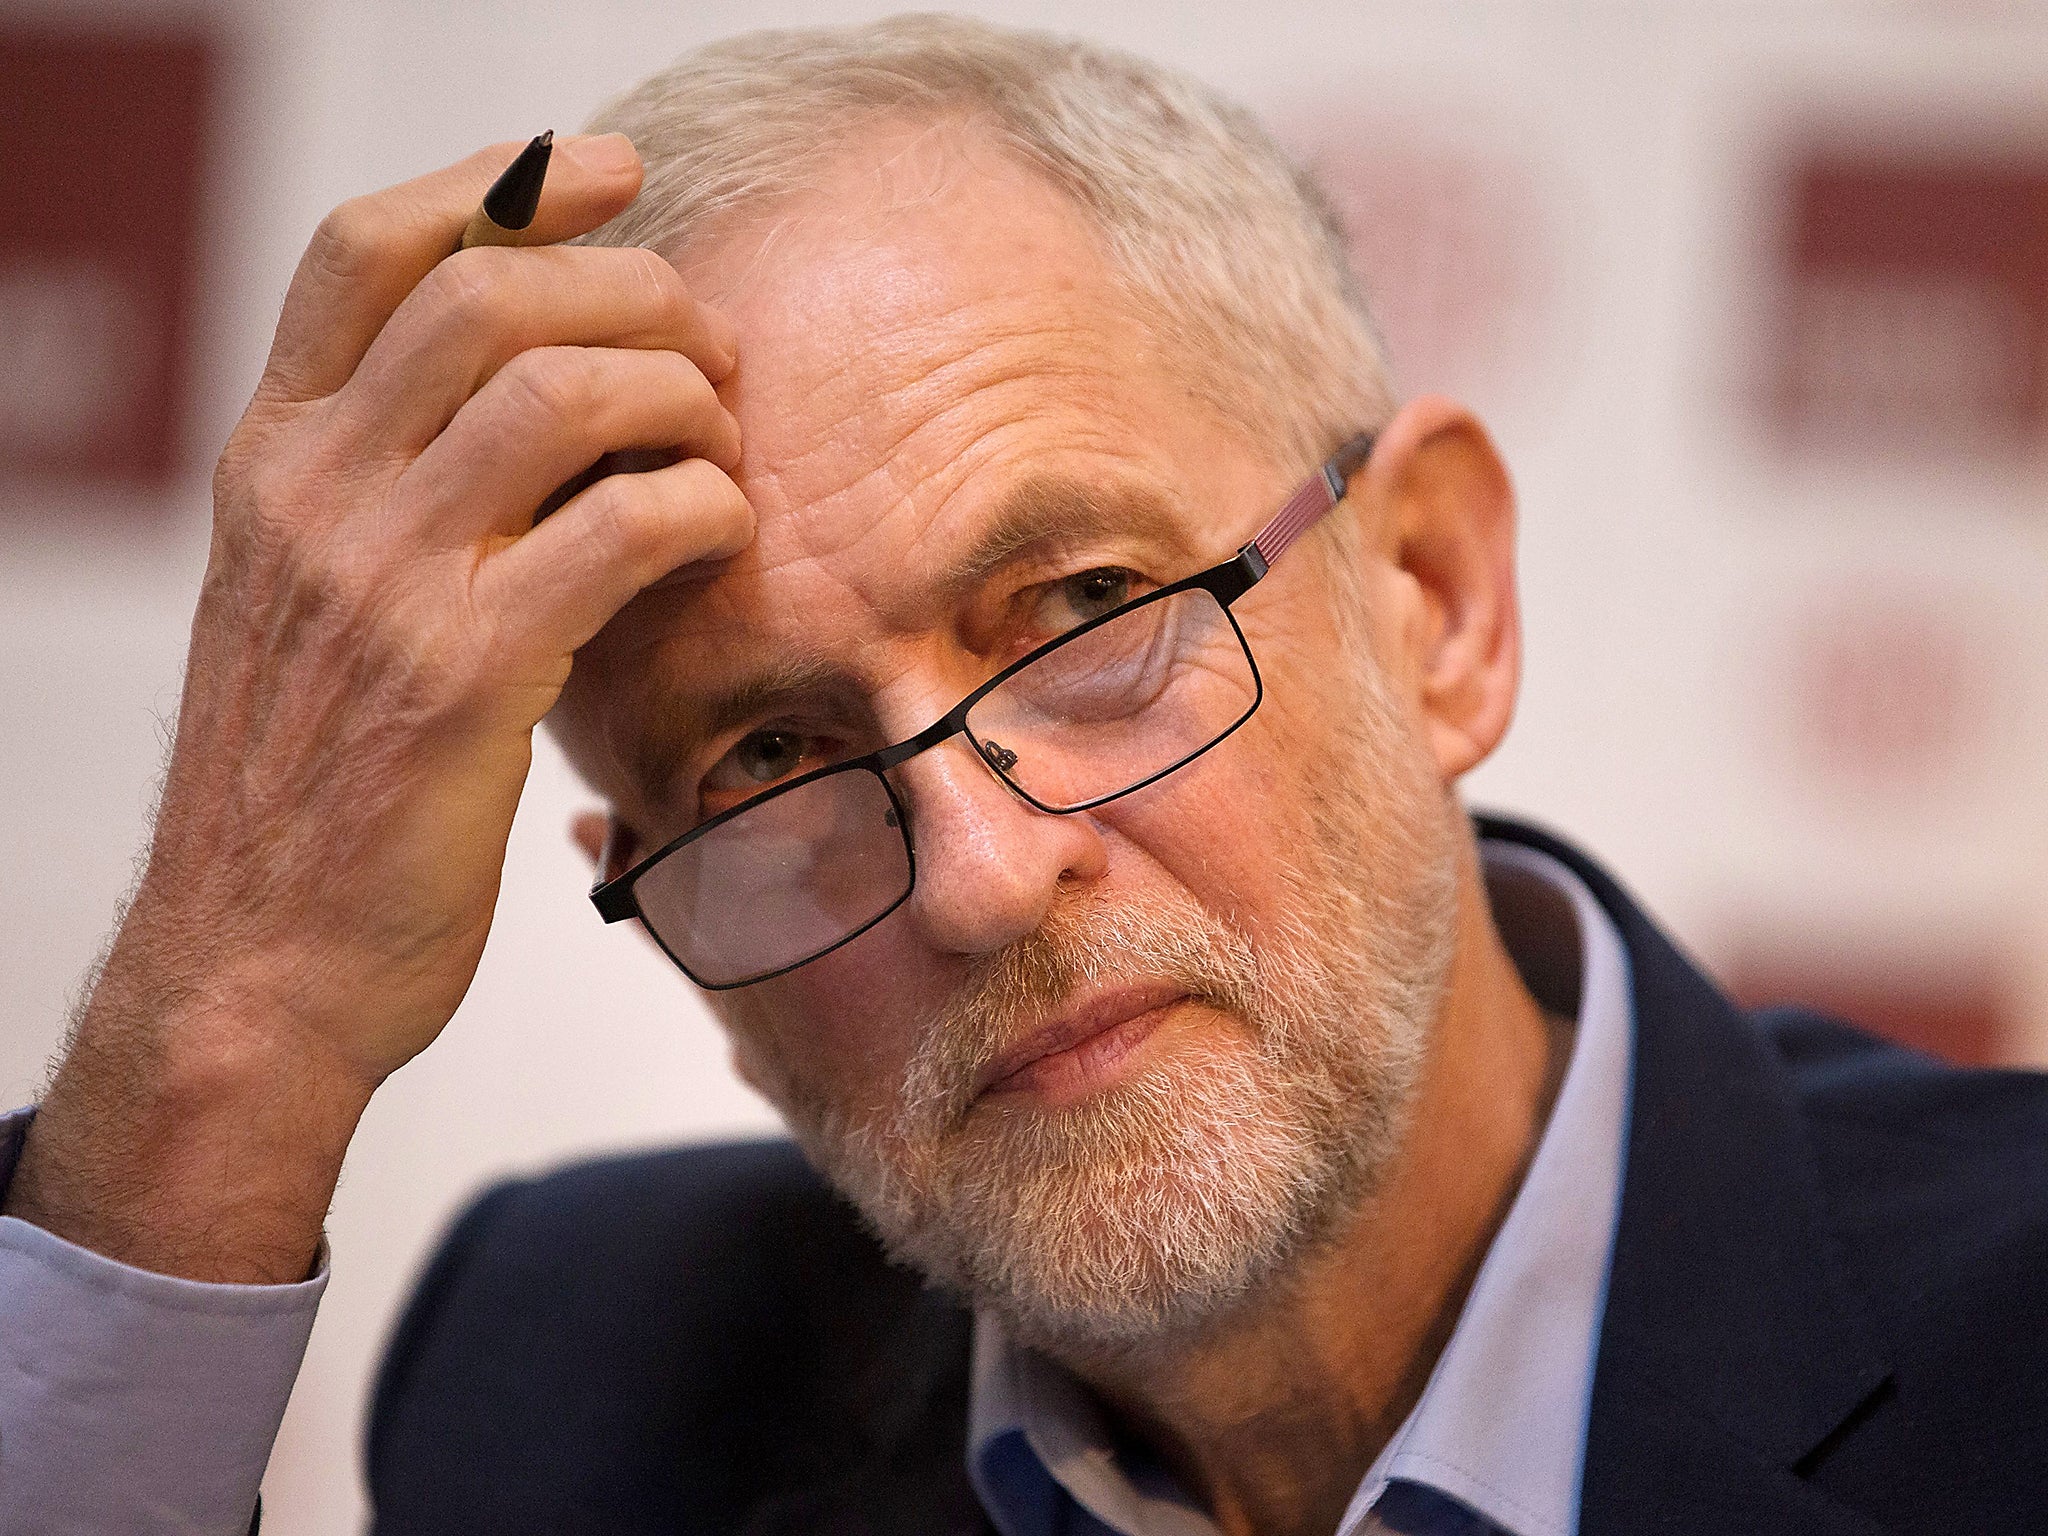 Jeremy Corbyn has come under pressure from his supporters to oppose Brexit